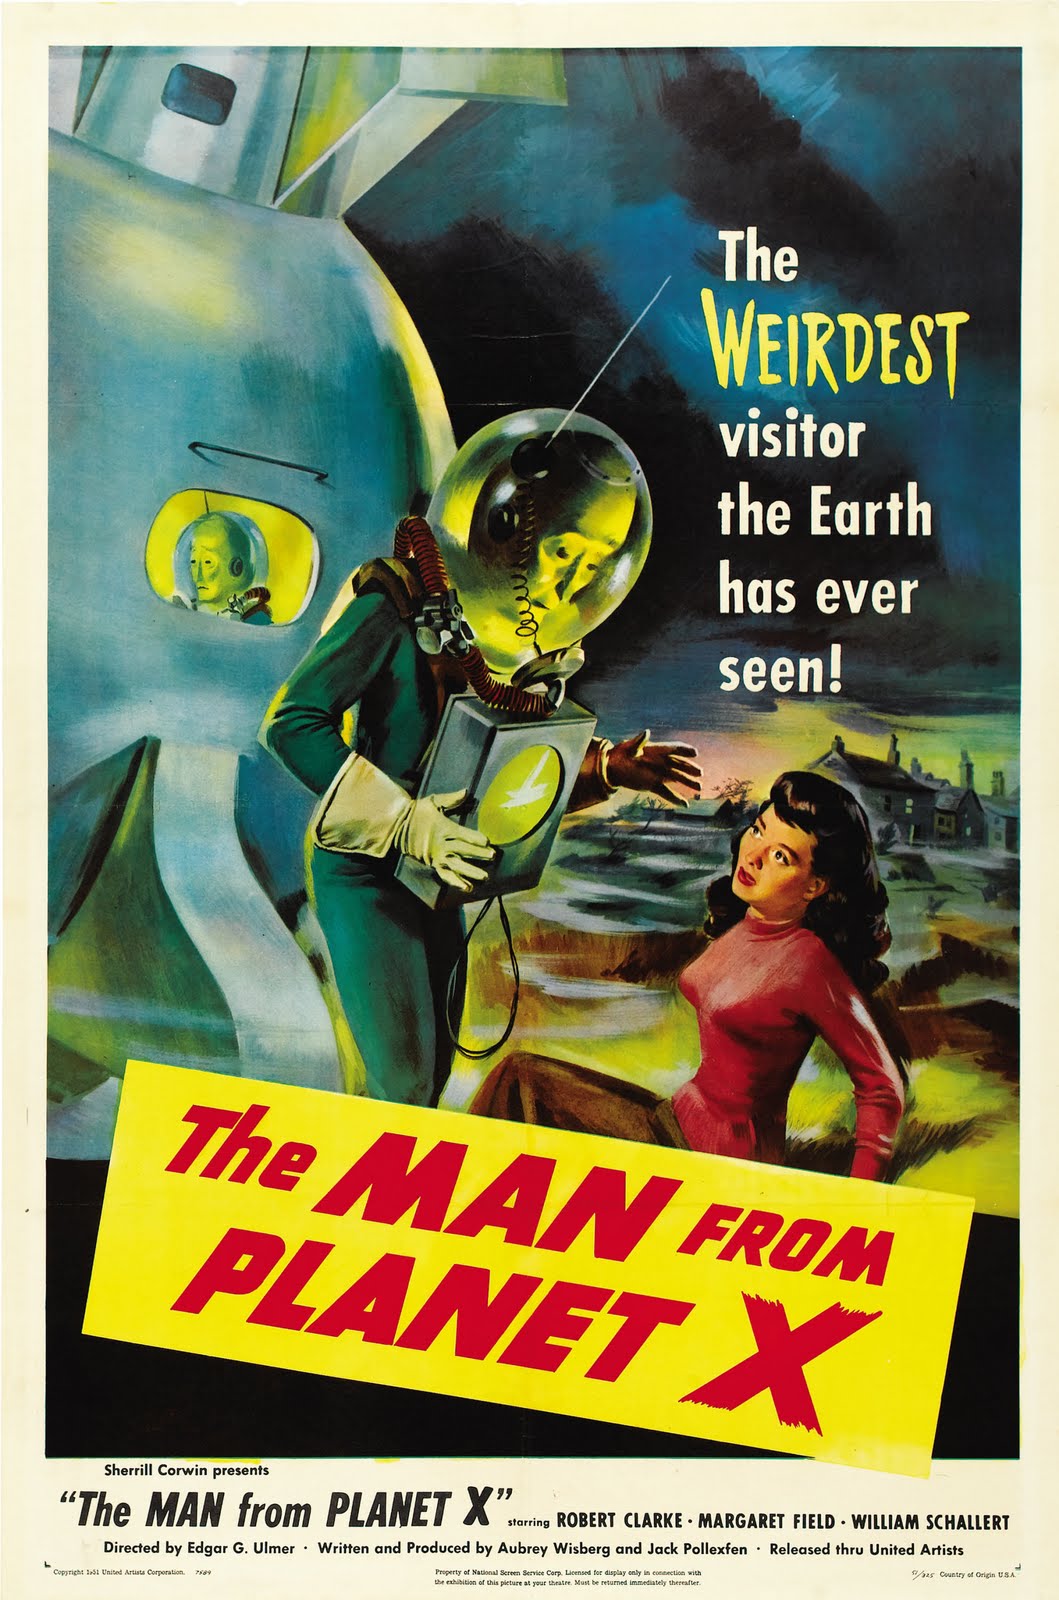 Old Retro Horror Film Posters - Man From Planet X